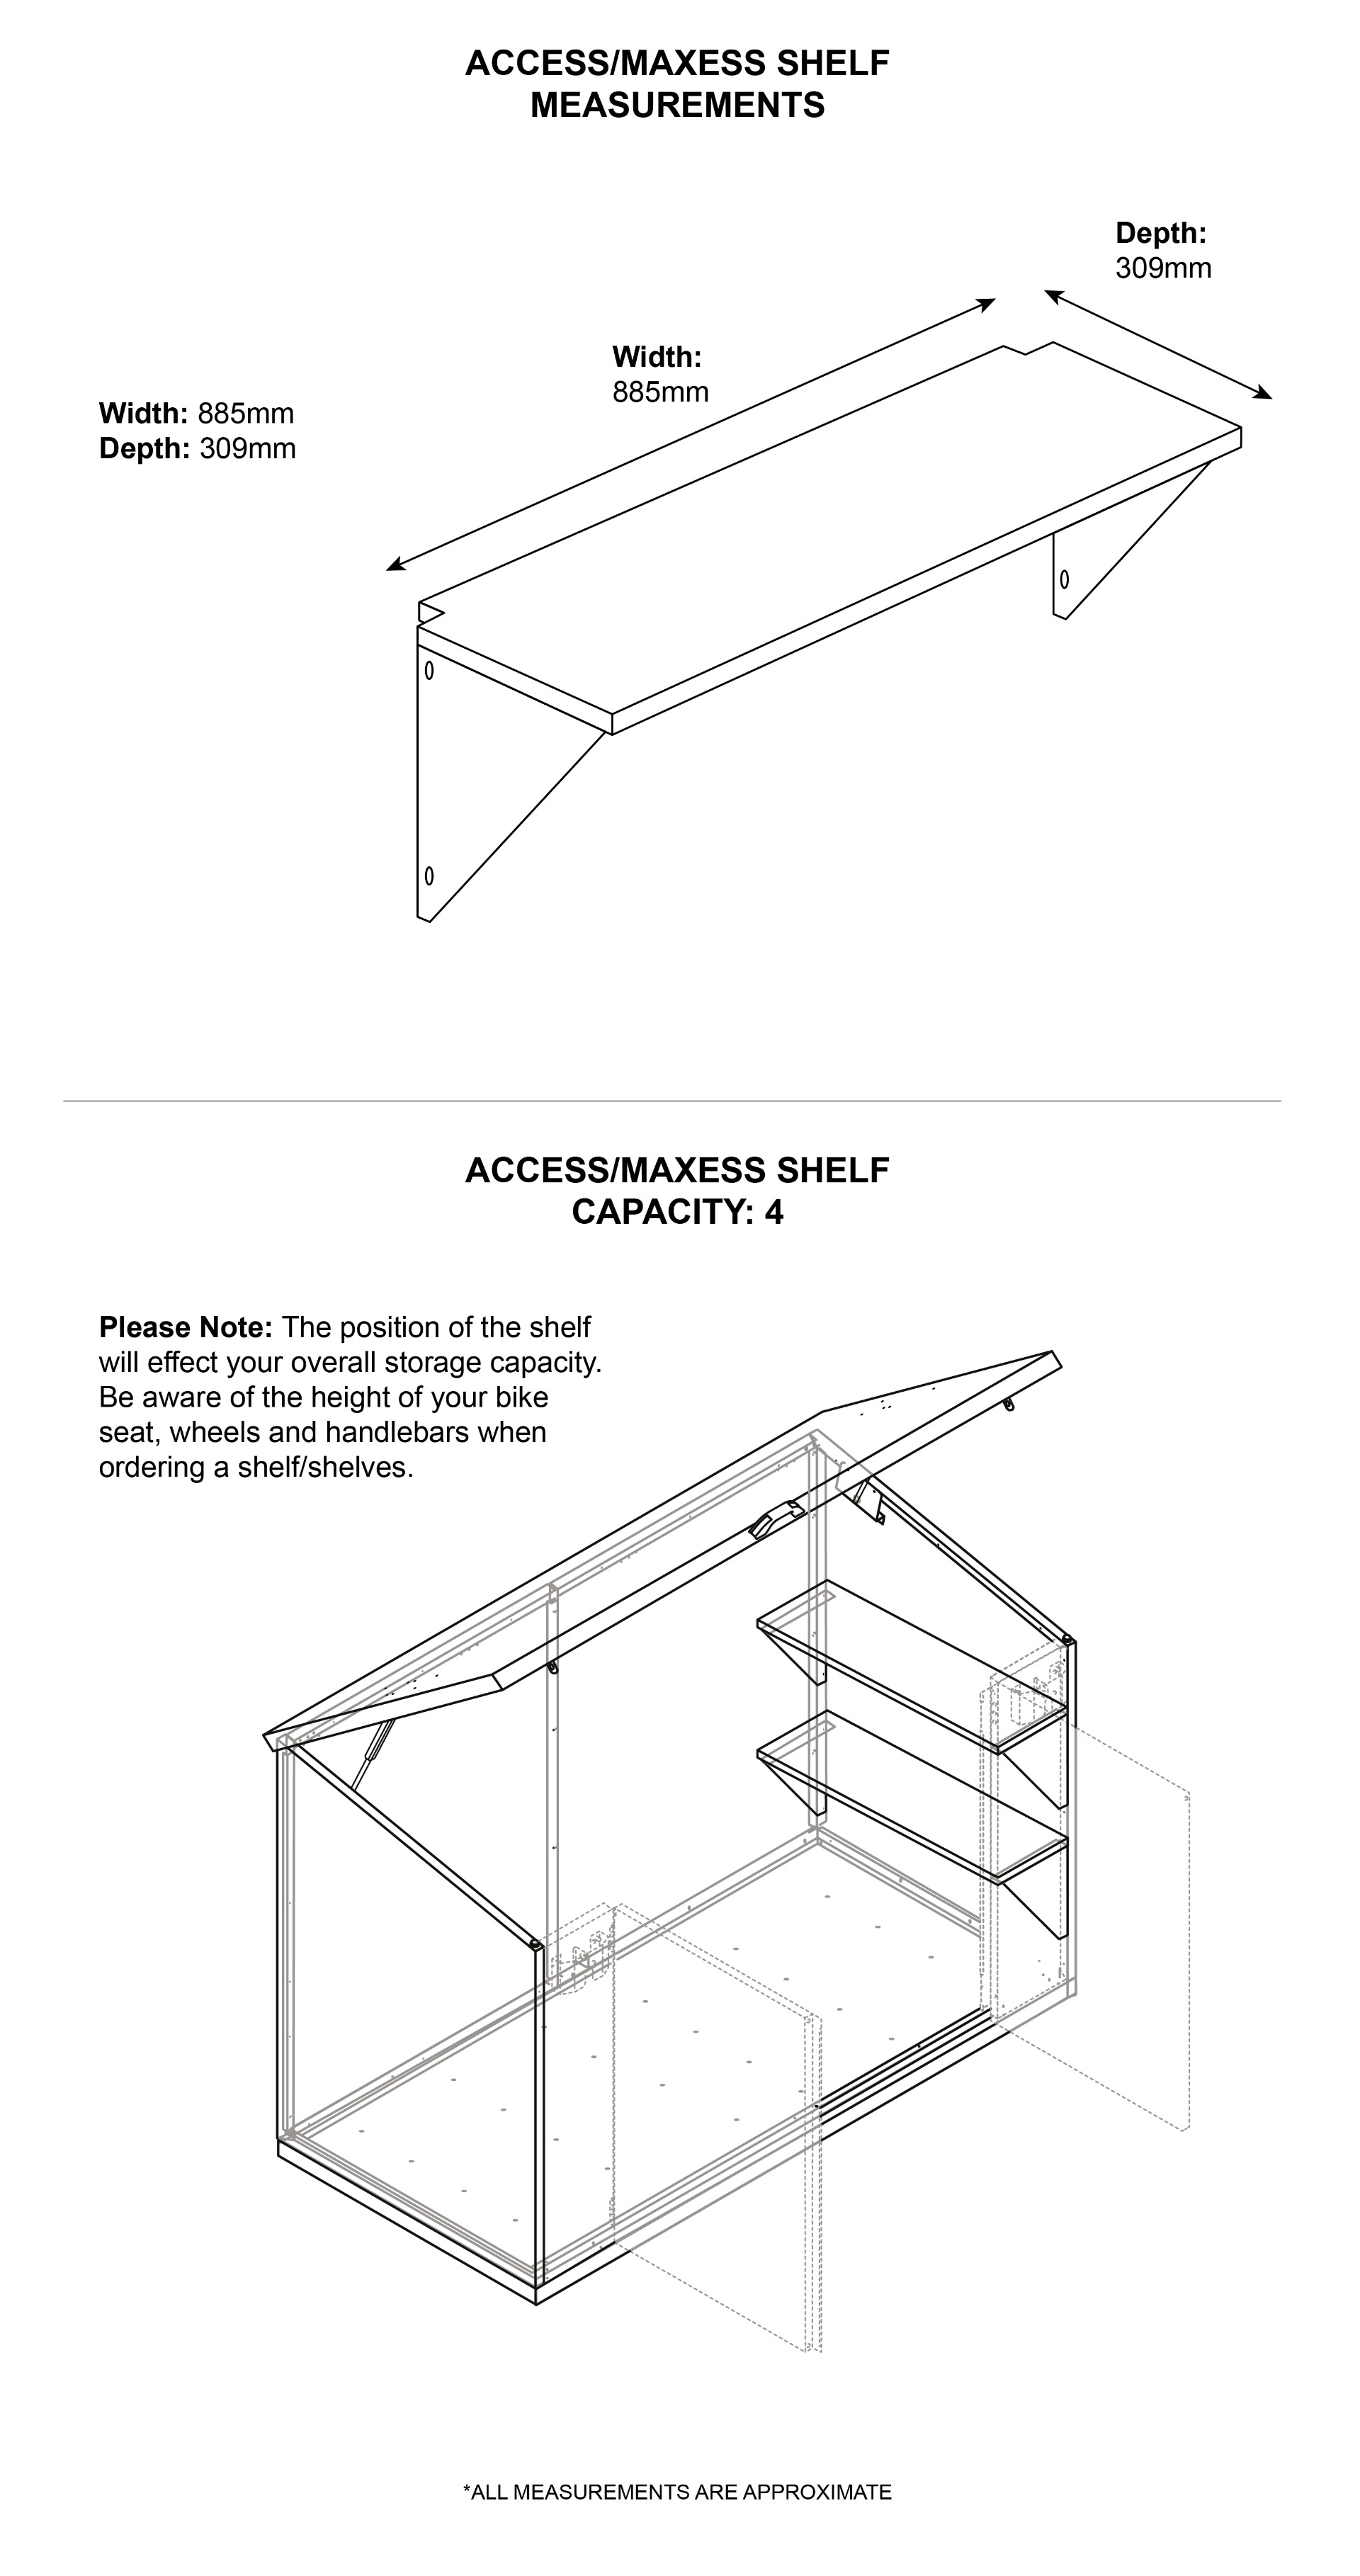 Easy Fit Strong shelf